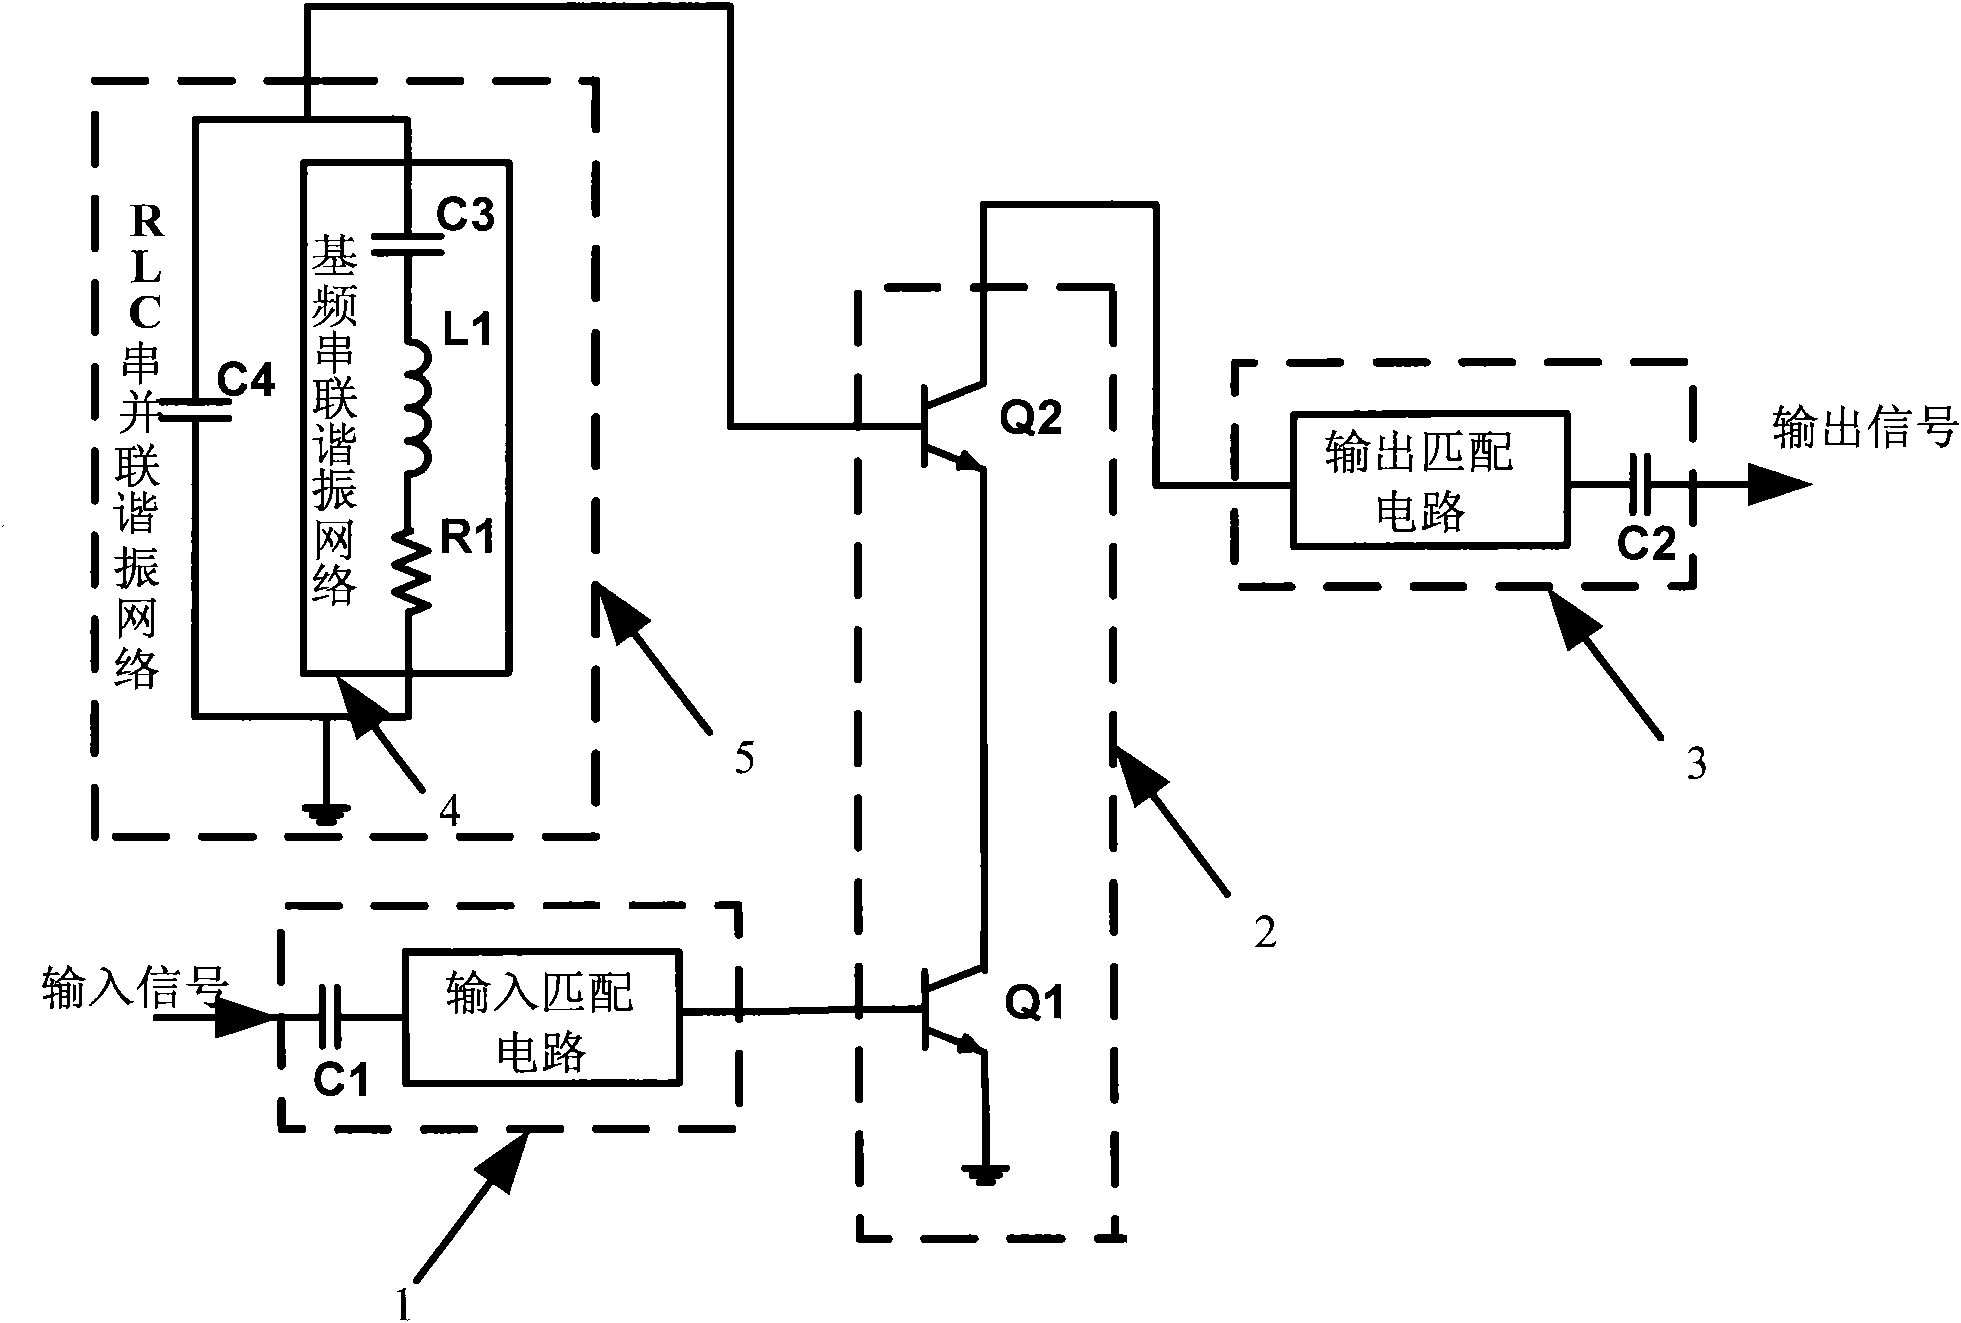 Radio-frequency CASCODE structure power amplifier with improved linearity and power added efficiency